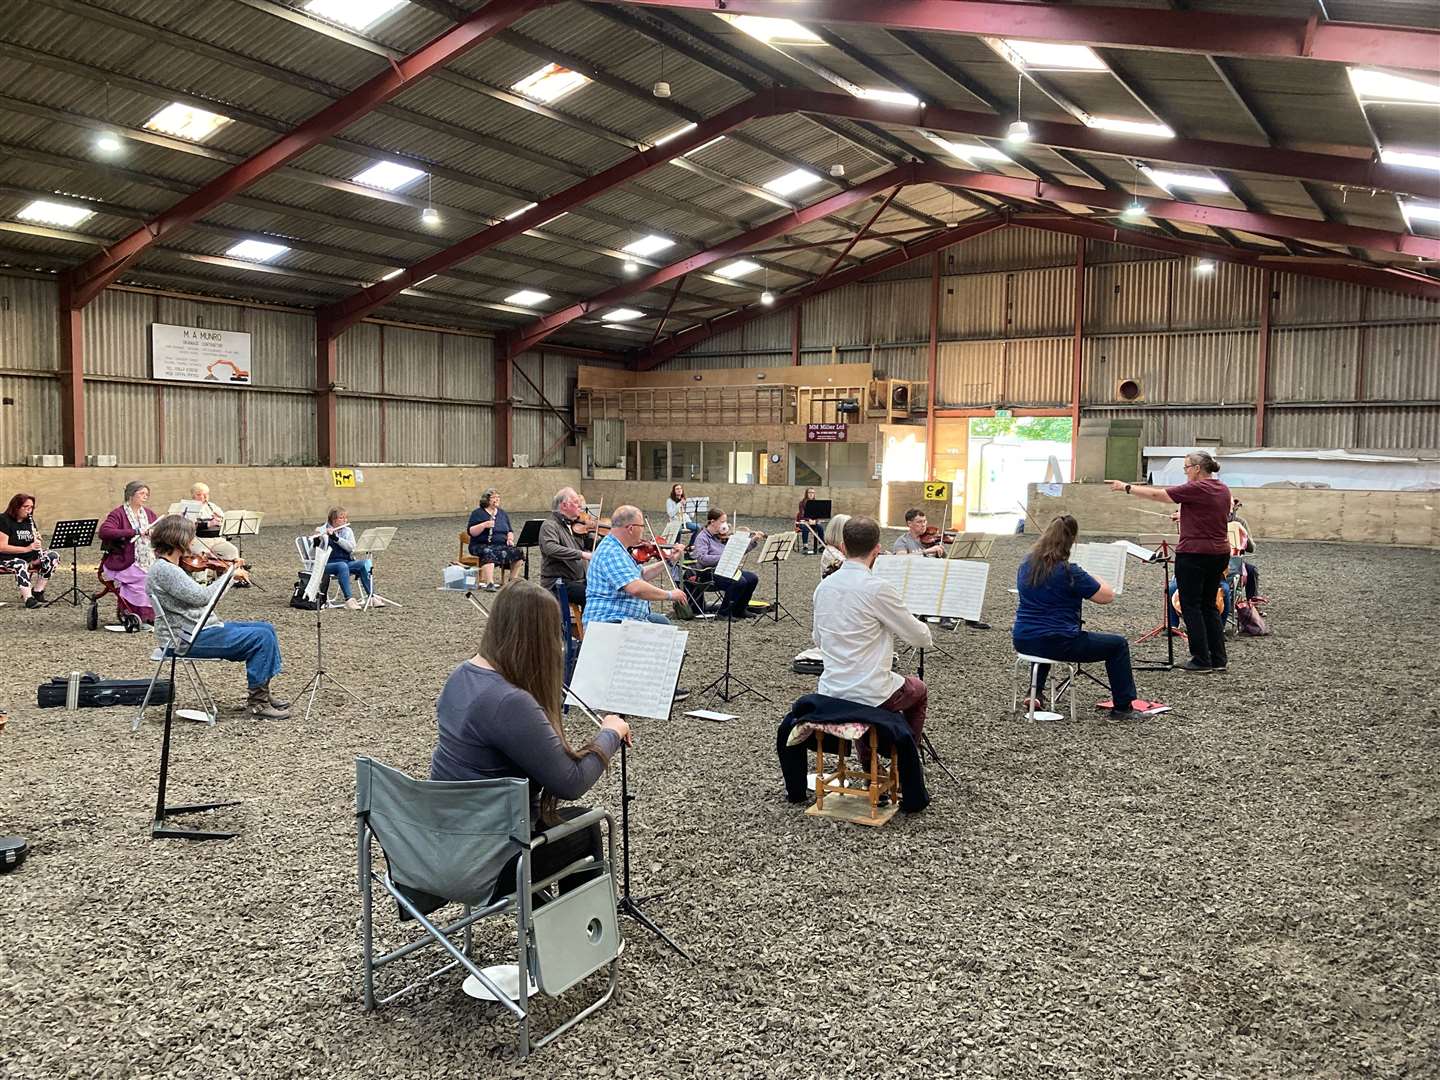 Members of the Caithness Orchestra playing in the indoor riding school at Halkirk.